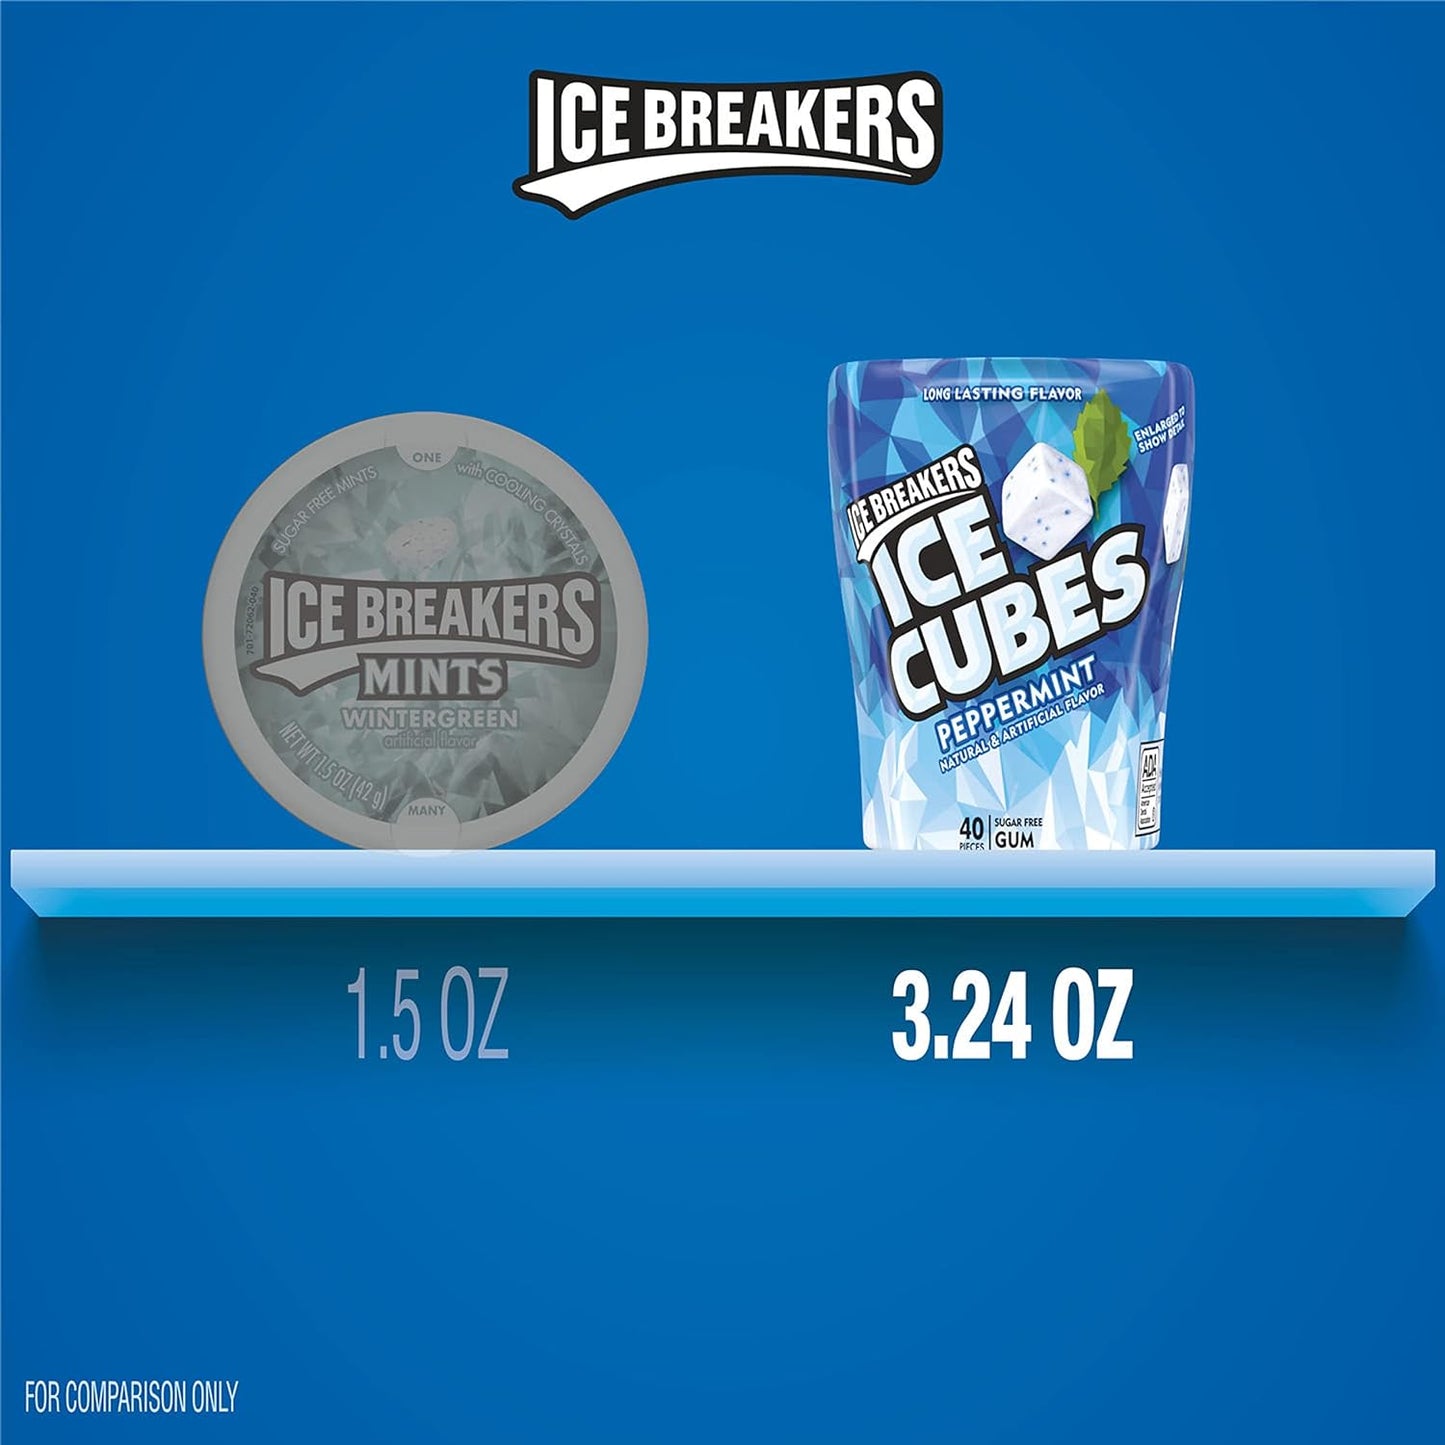 ICE BREAKERS Ice Cubes Peppermint Sugar Free Chewing Gum Bottles, 3.24 oz (6 Count, 40 Pieces)